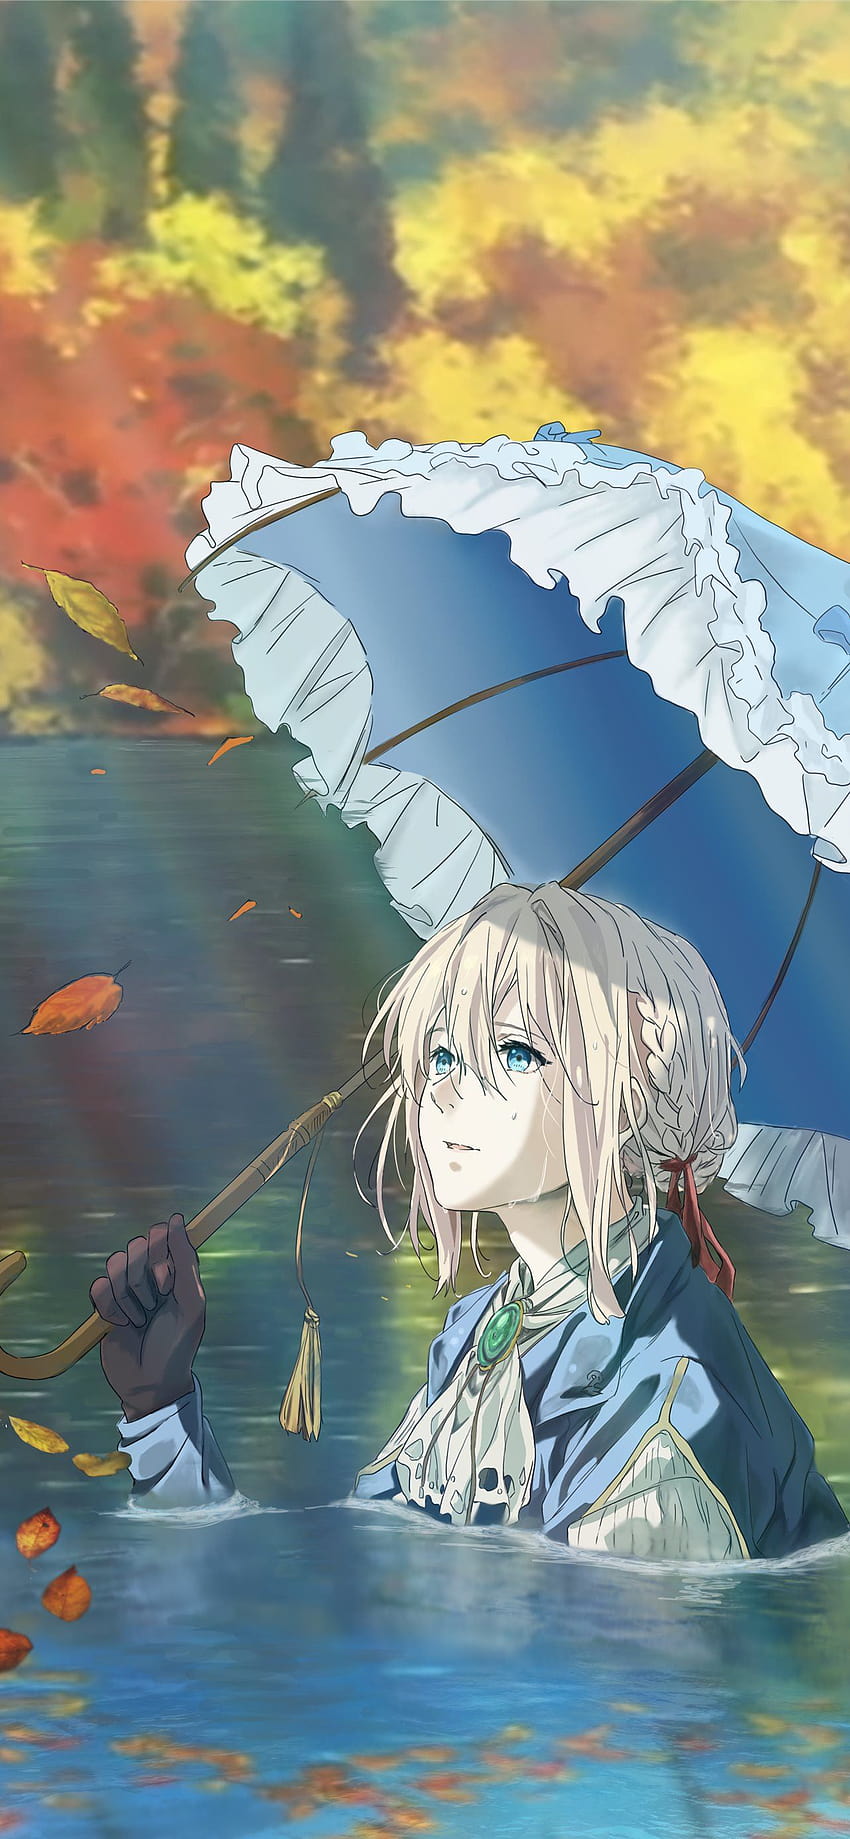 Film in 500: Violet Evergarden: The Movie Review – WCRobinson